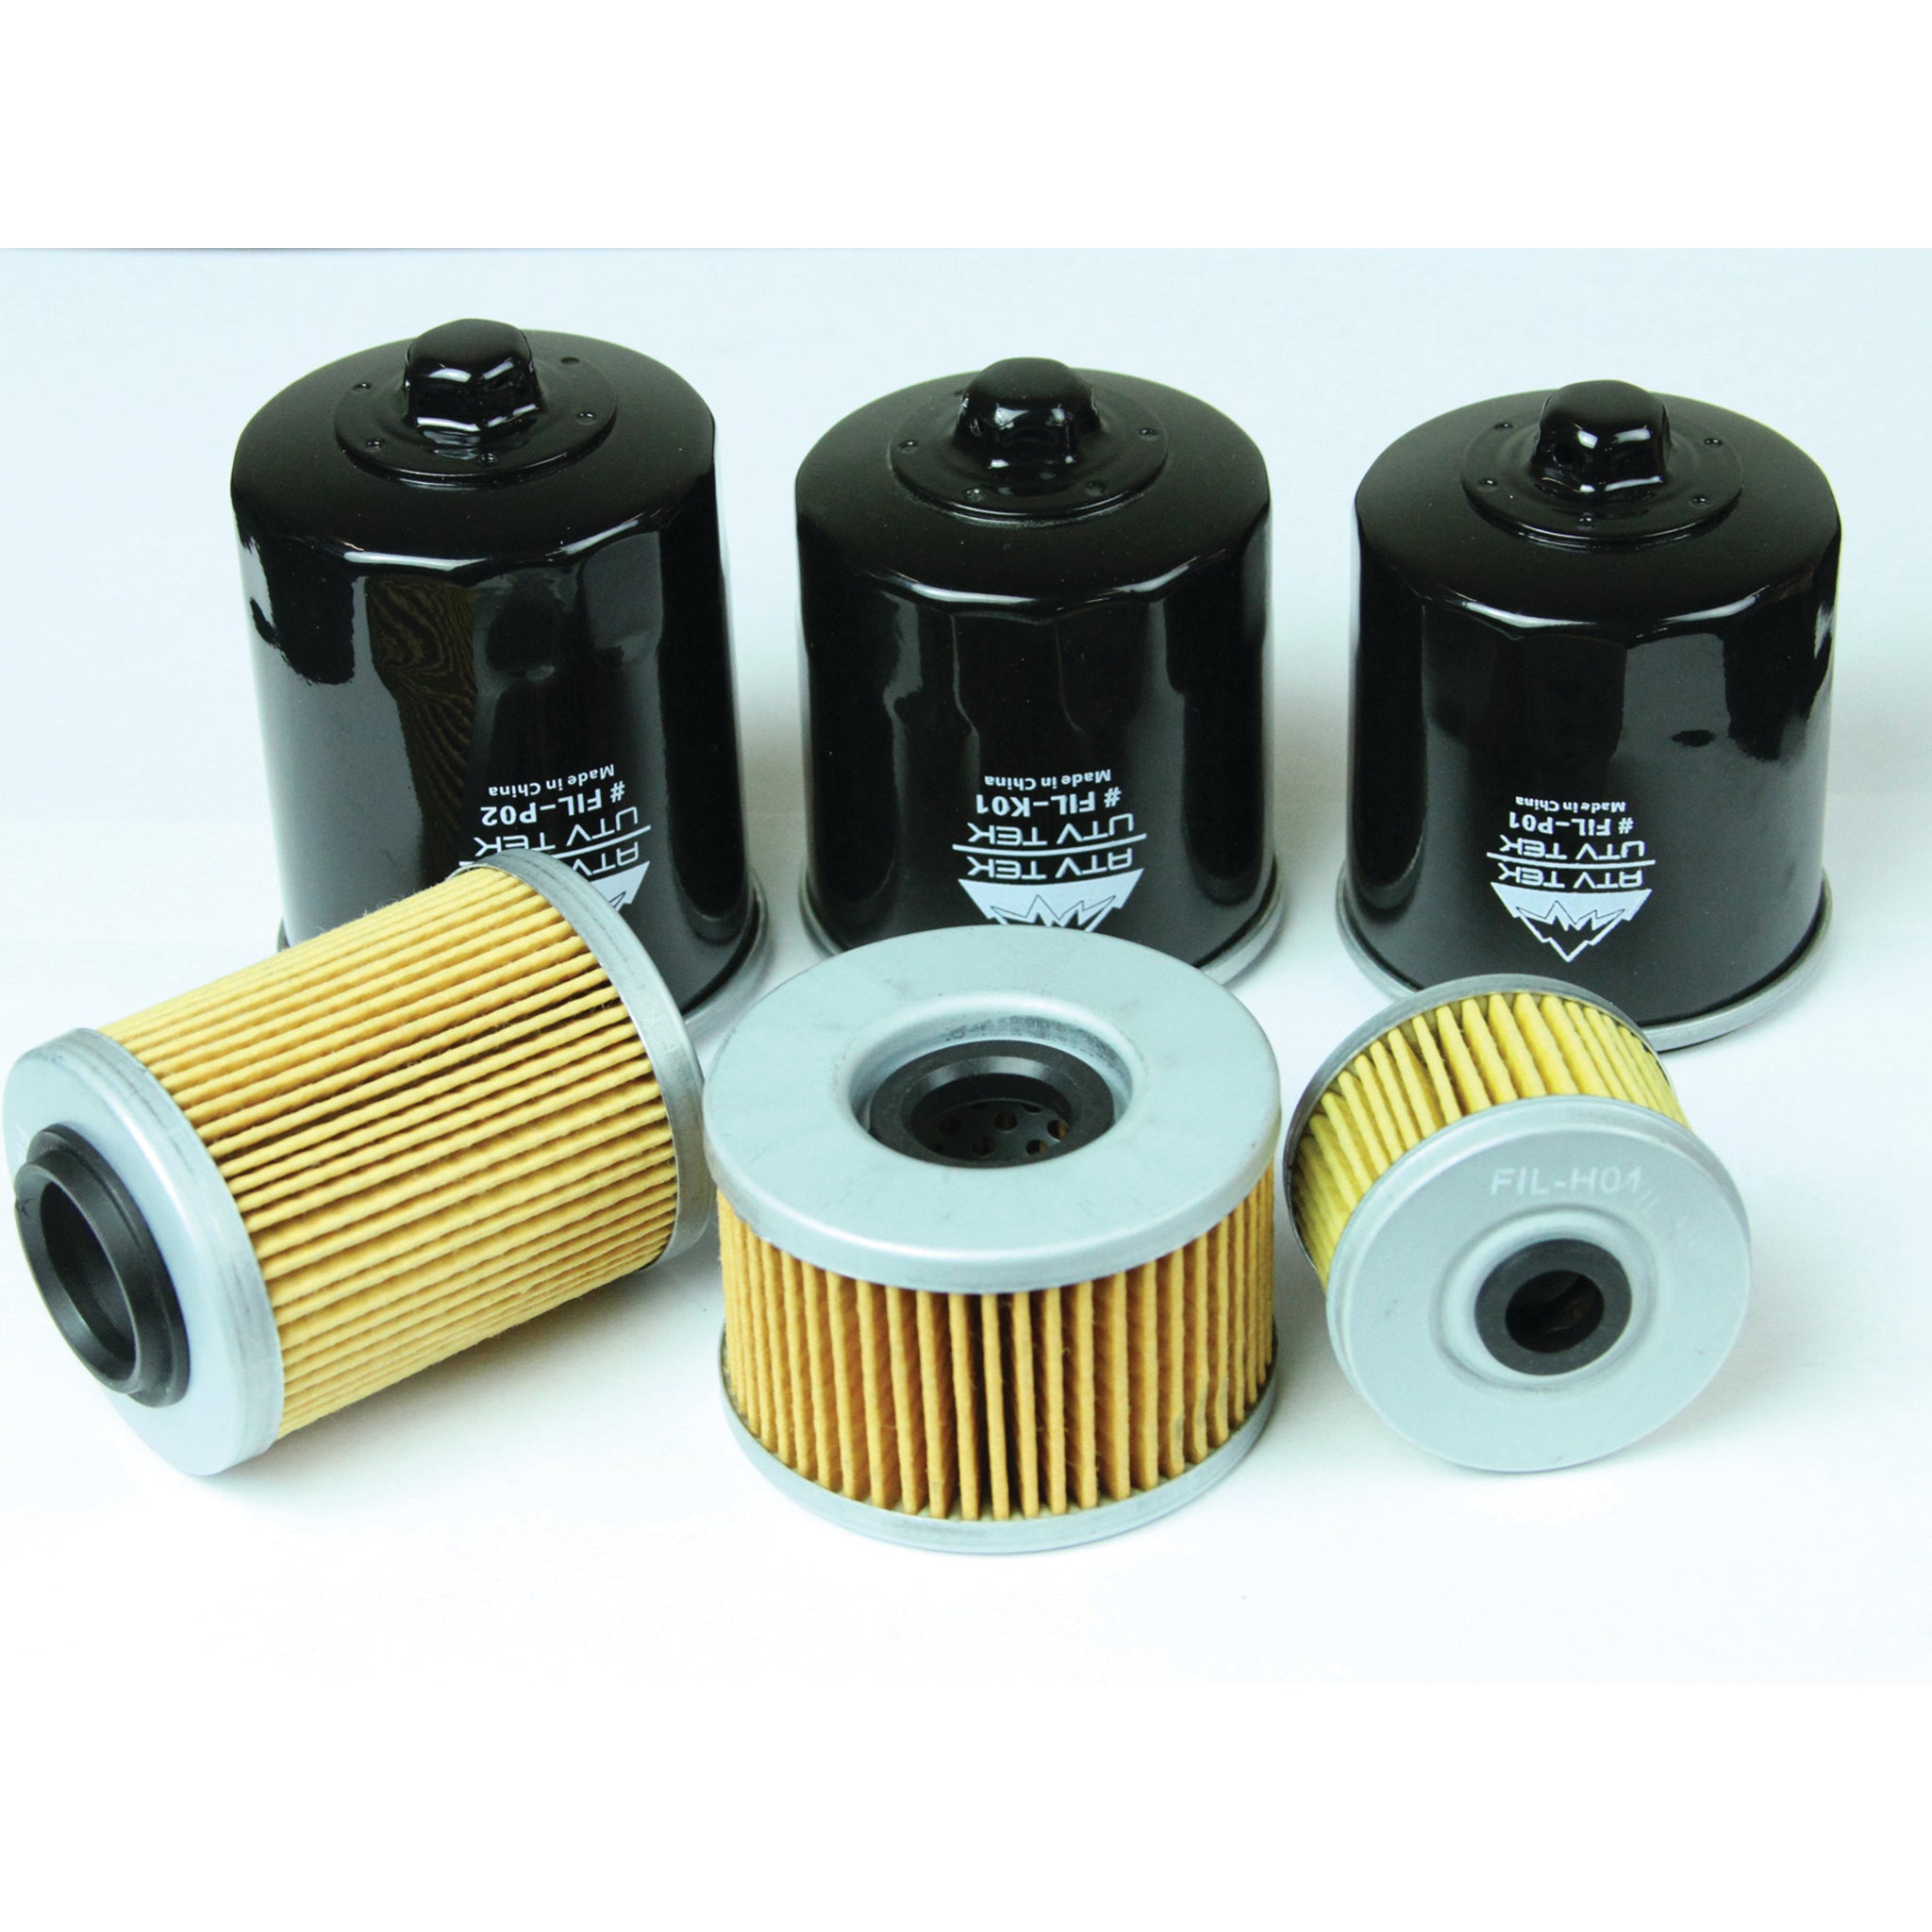 Powersports Pro Oil Filters - 6 Pack